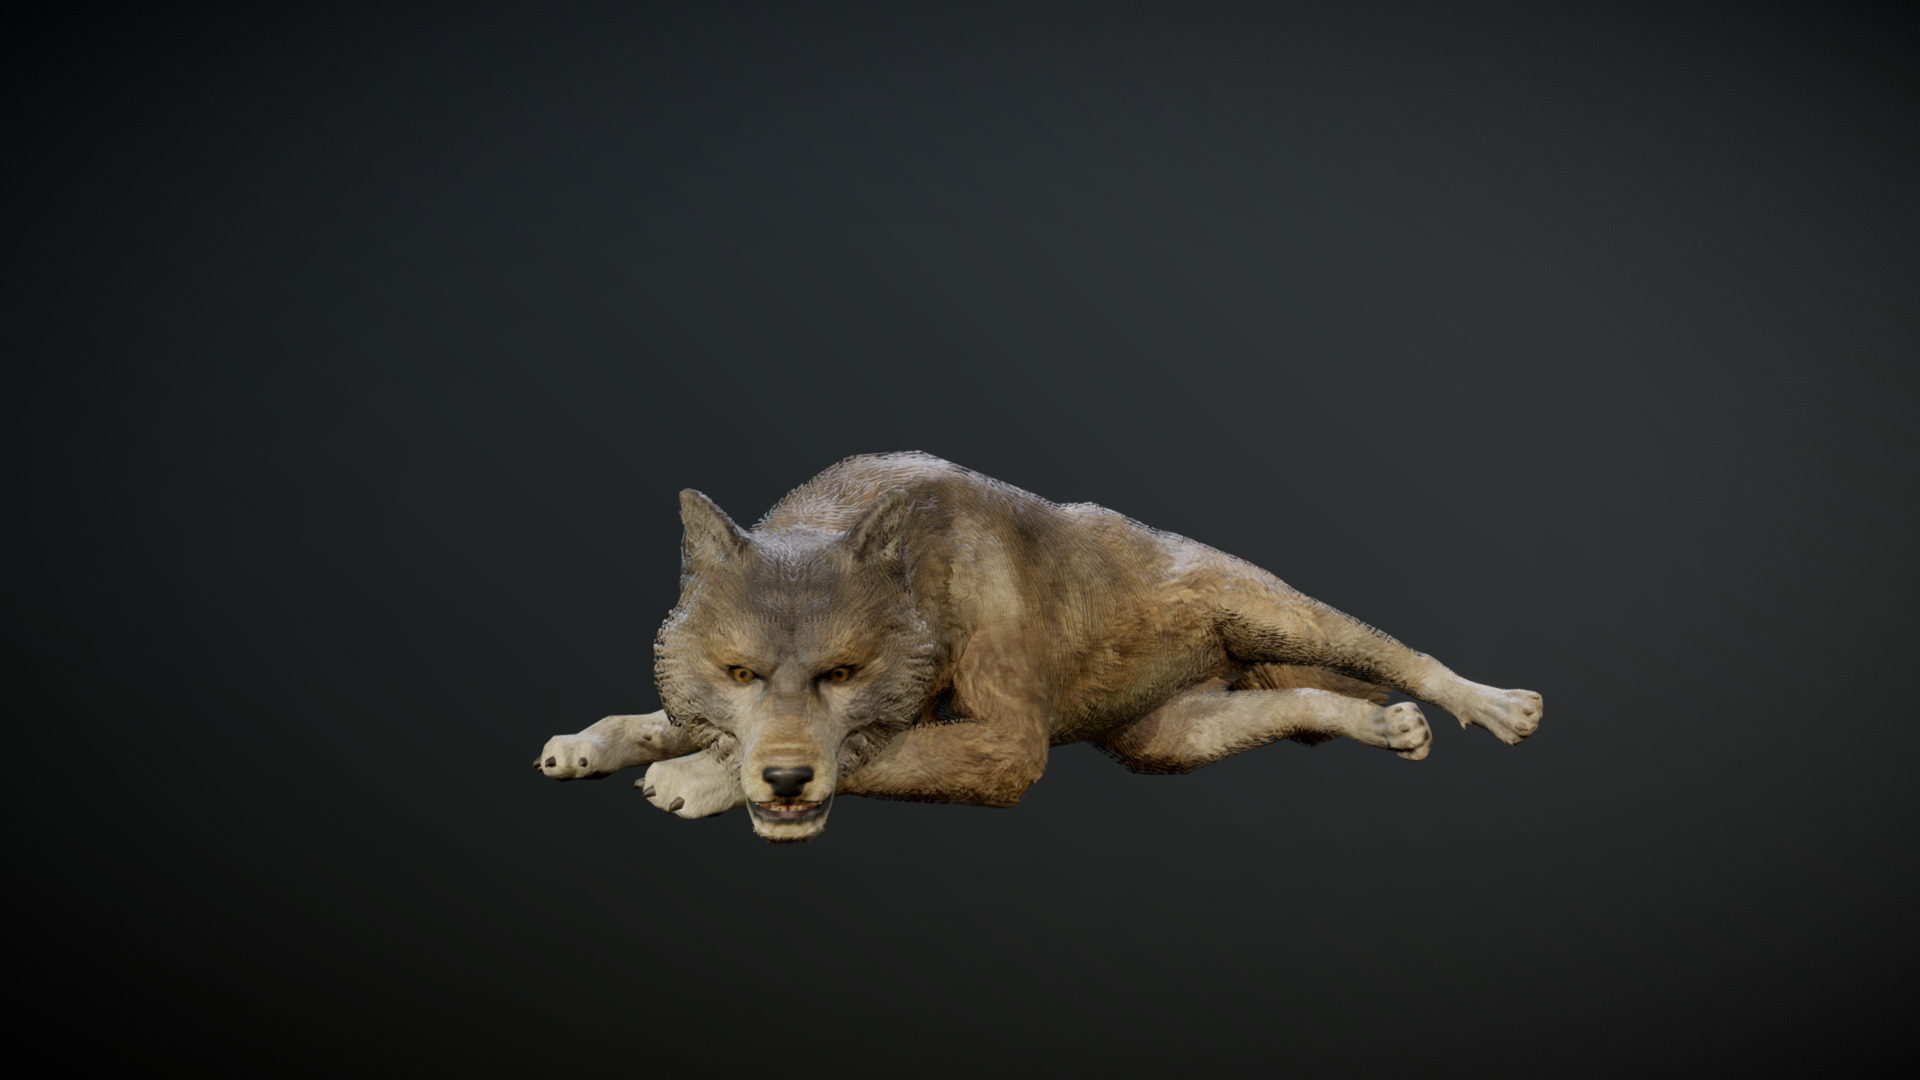 3D model WOLF ANIMATIONS - This is a 3D model of the WOLF ANIMATIONS. The 3D model is about a wolf lying on its back.